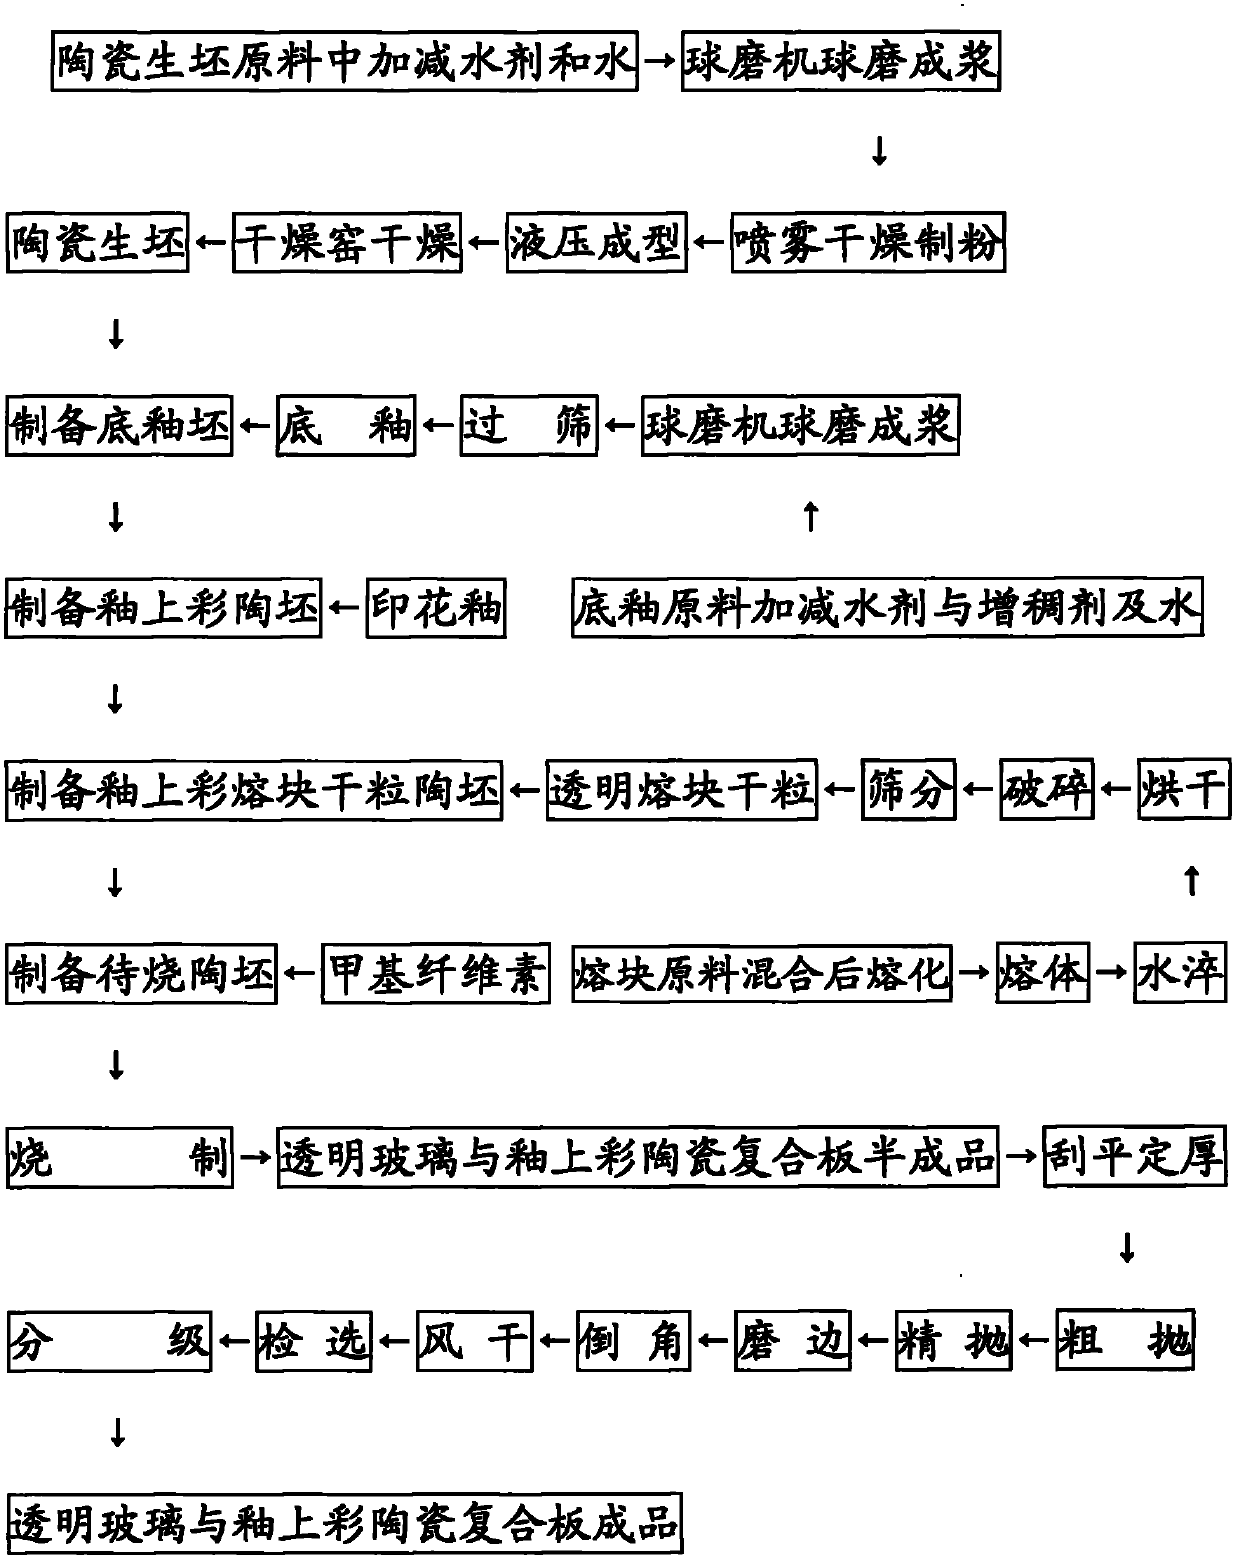 Method for producing transparent glass and overglazed color ceramic sandwich by single firing